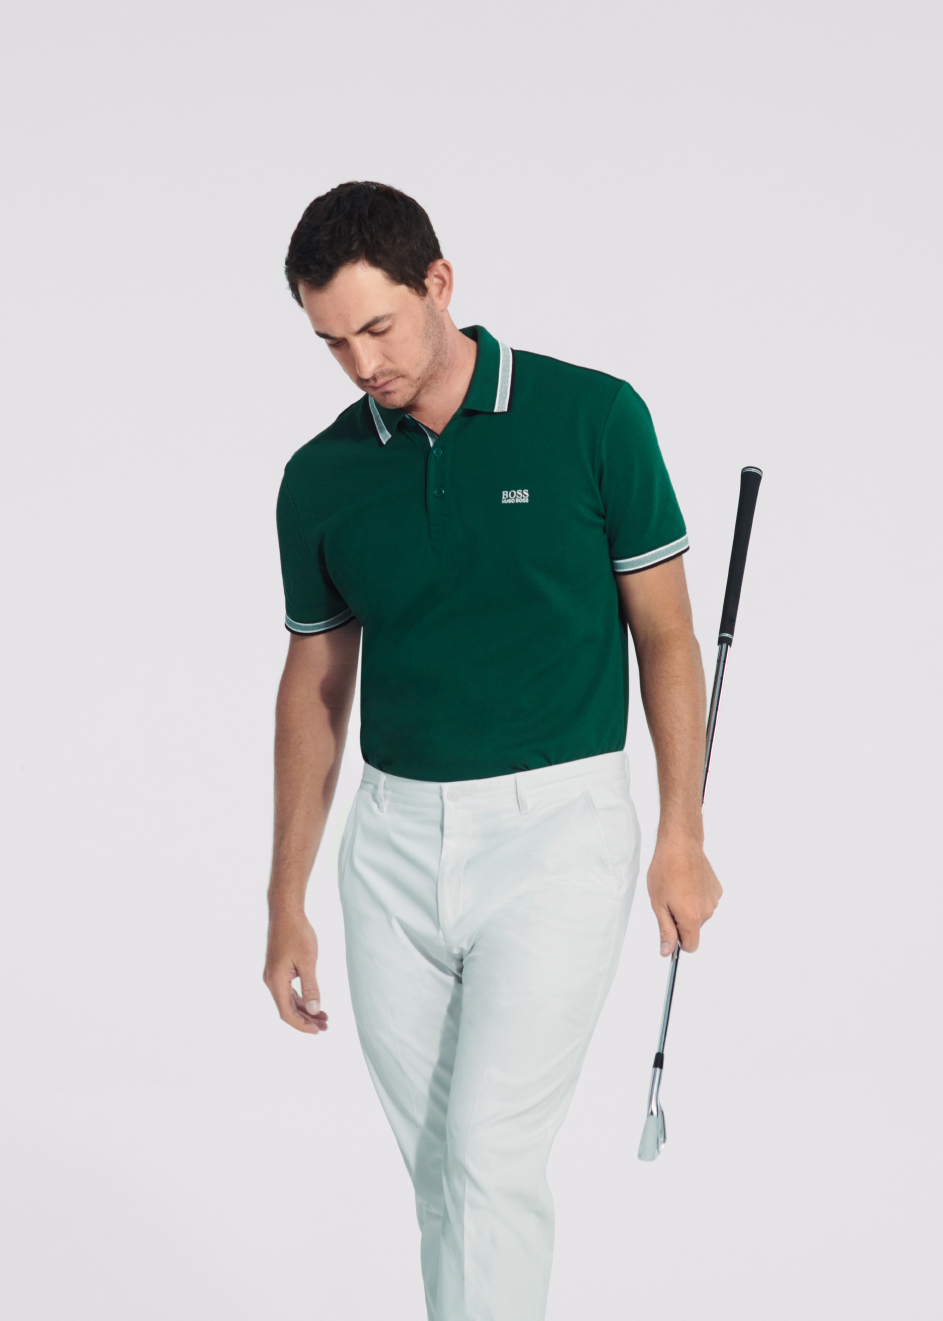 Giant Artists | Collin Erie Photographed Pro Golfer Patrick Cantlay For ...